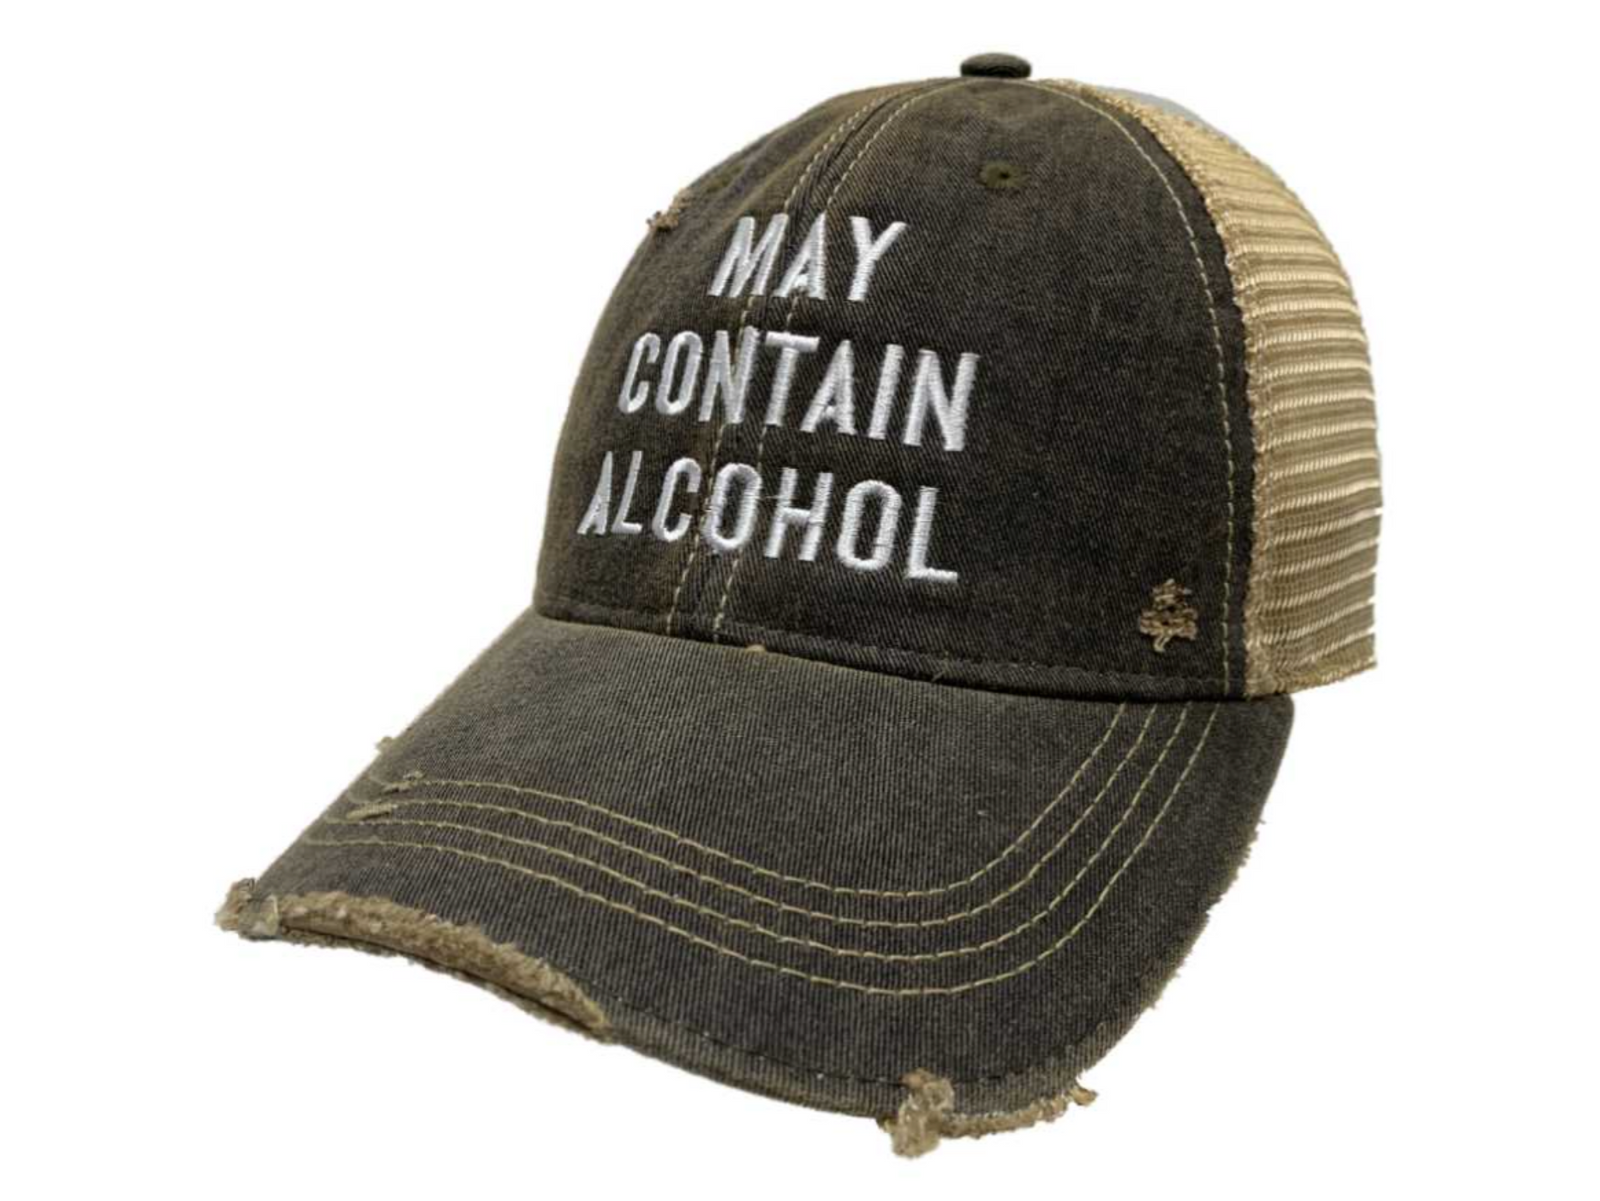 May Contain Alcohol Snap Back Trucker Cap